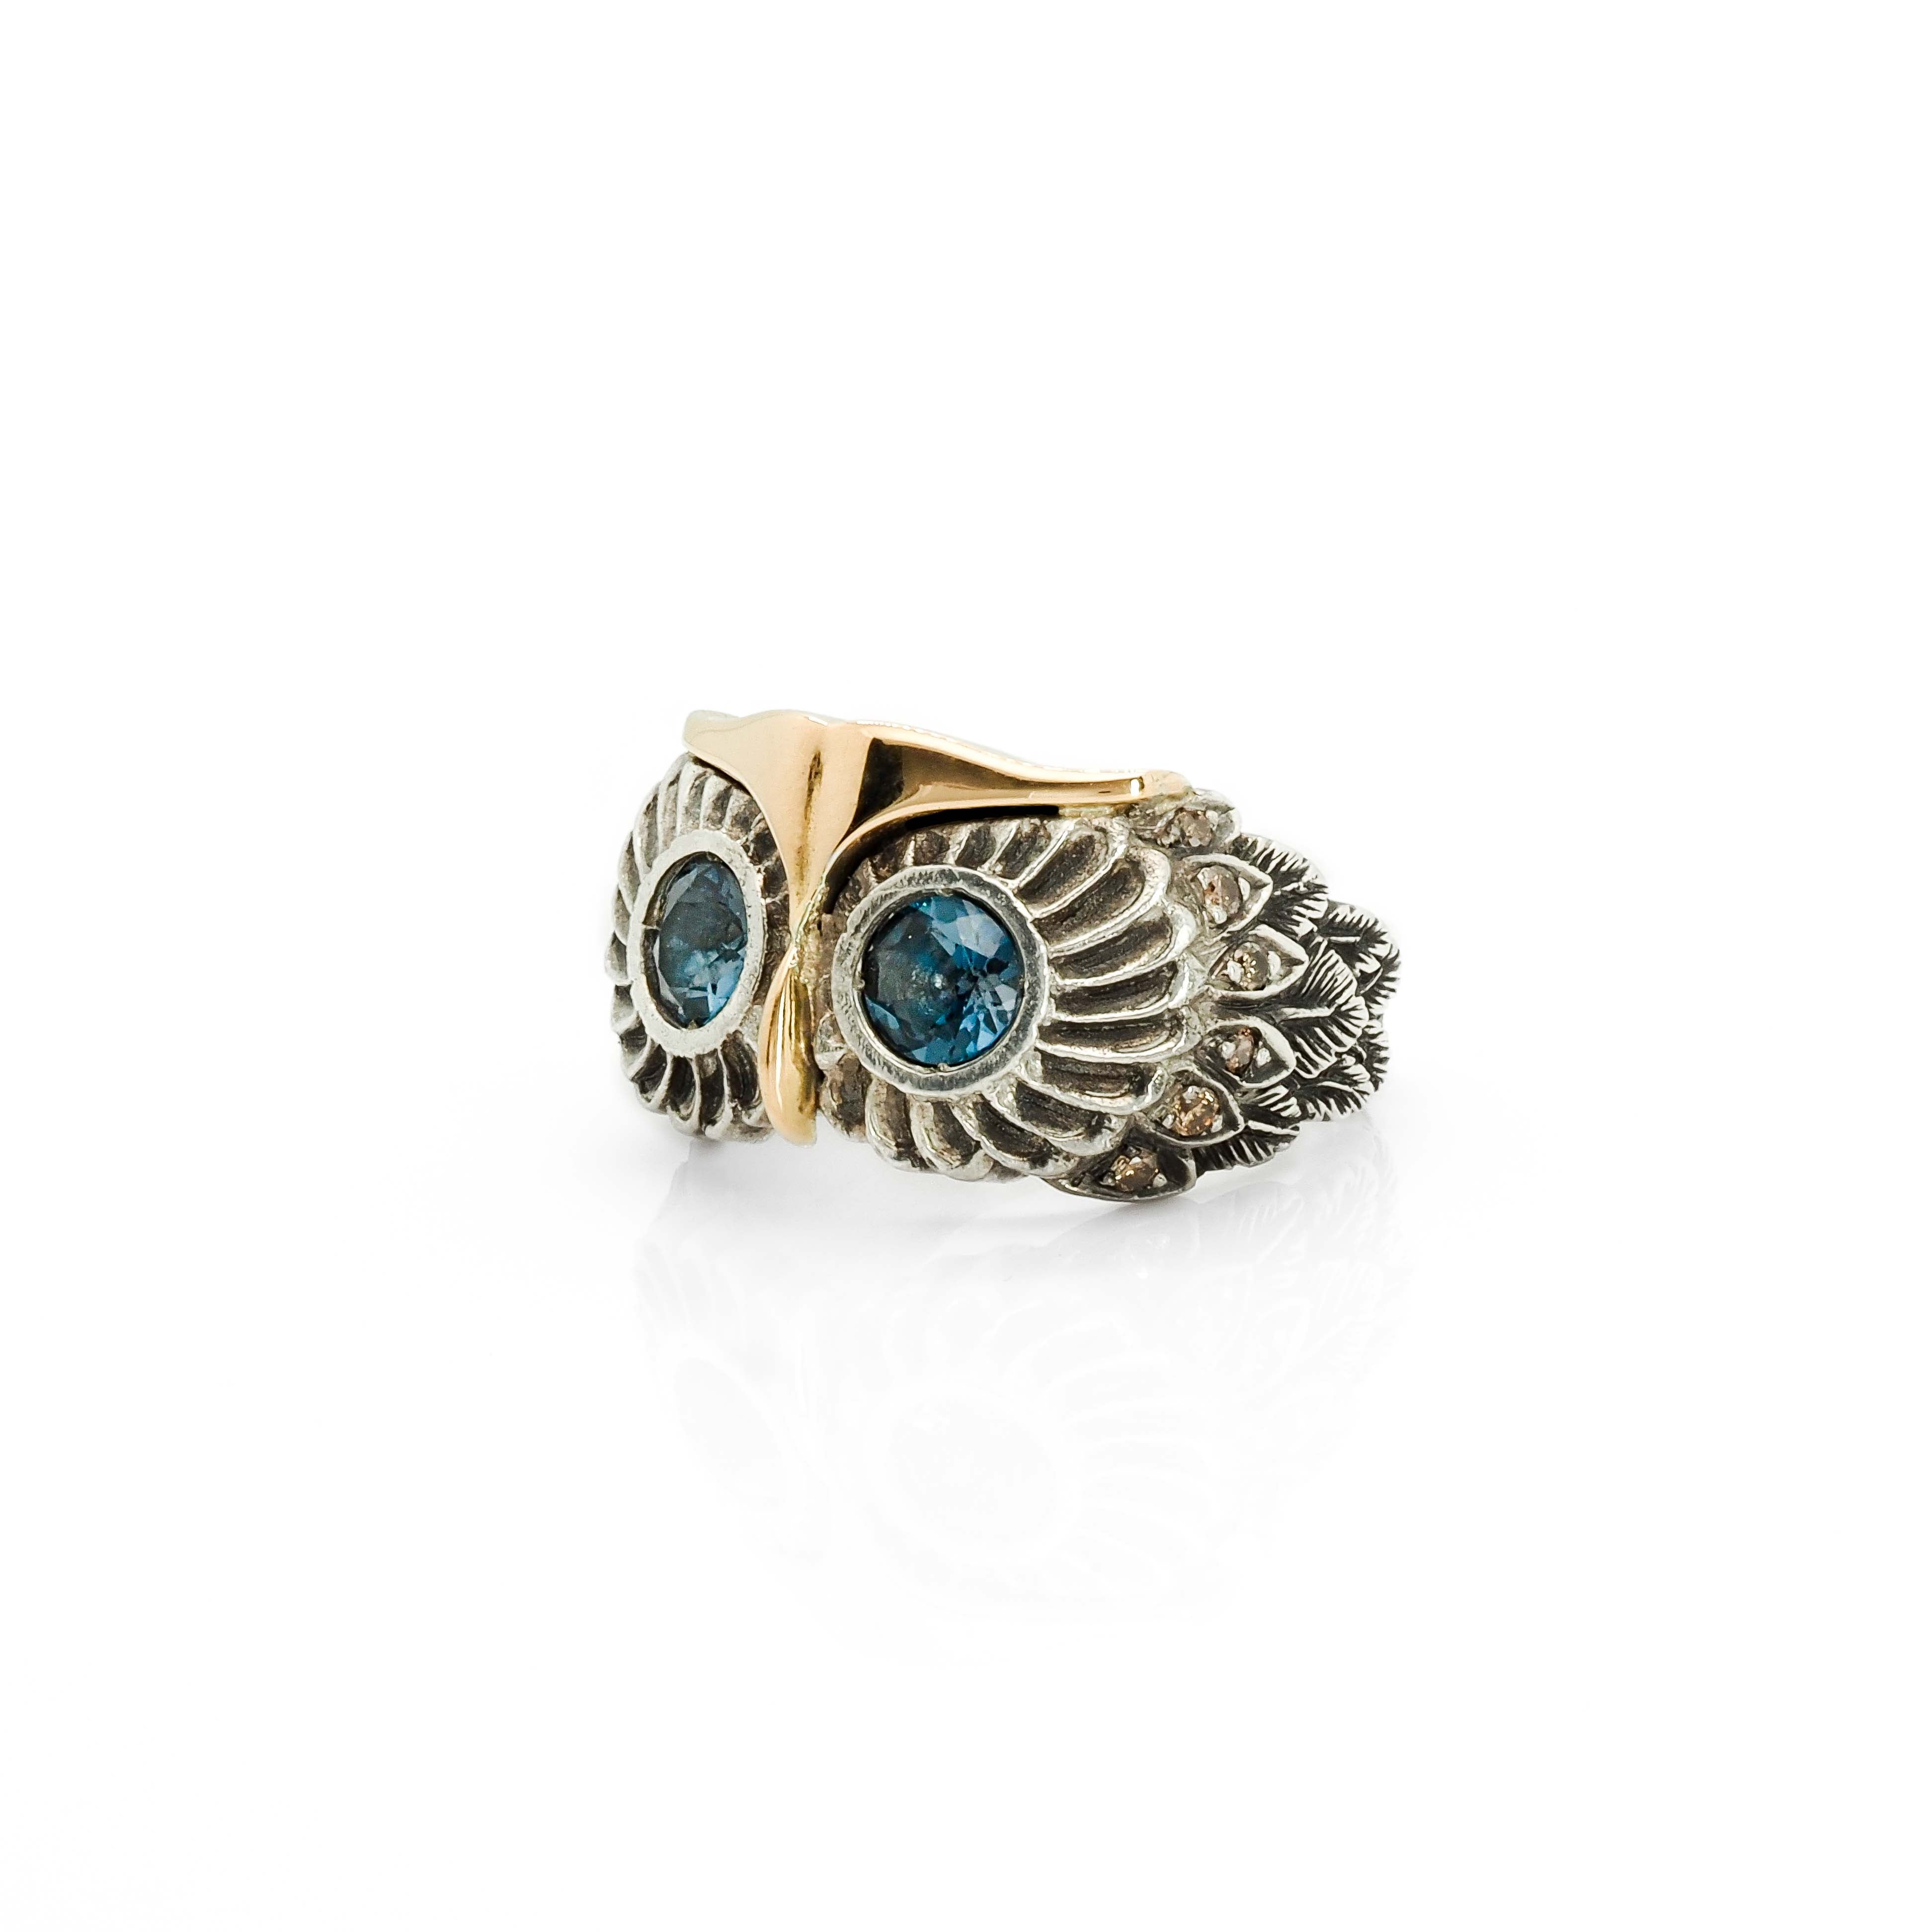 Taru Jewelry charming owl ring is a unique piece crafted from 18K gold and sterling silver, featuring a design that captures the essence of the wise and mysterious bird. The owl is a symbol of wisdom, known for its sharp vision and hearing. It is also believed to be a protector and messenger of secrets. The ring features London blue topaz as the owl&#39;s eyes, which represents loyalty and righteousness, and brown diamonds for the feathers. It is said to help improve communication and finding success.